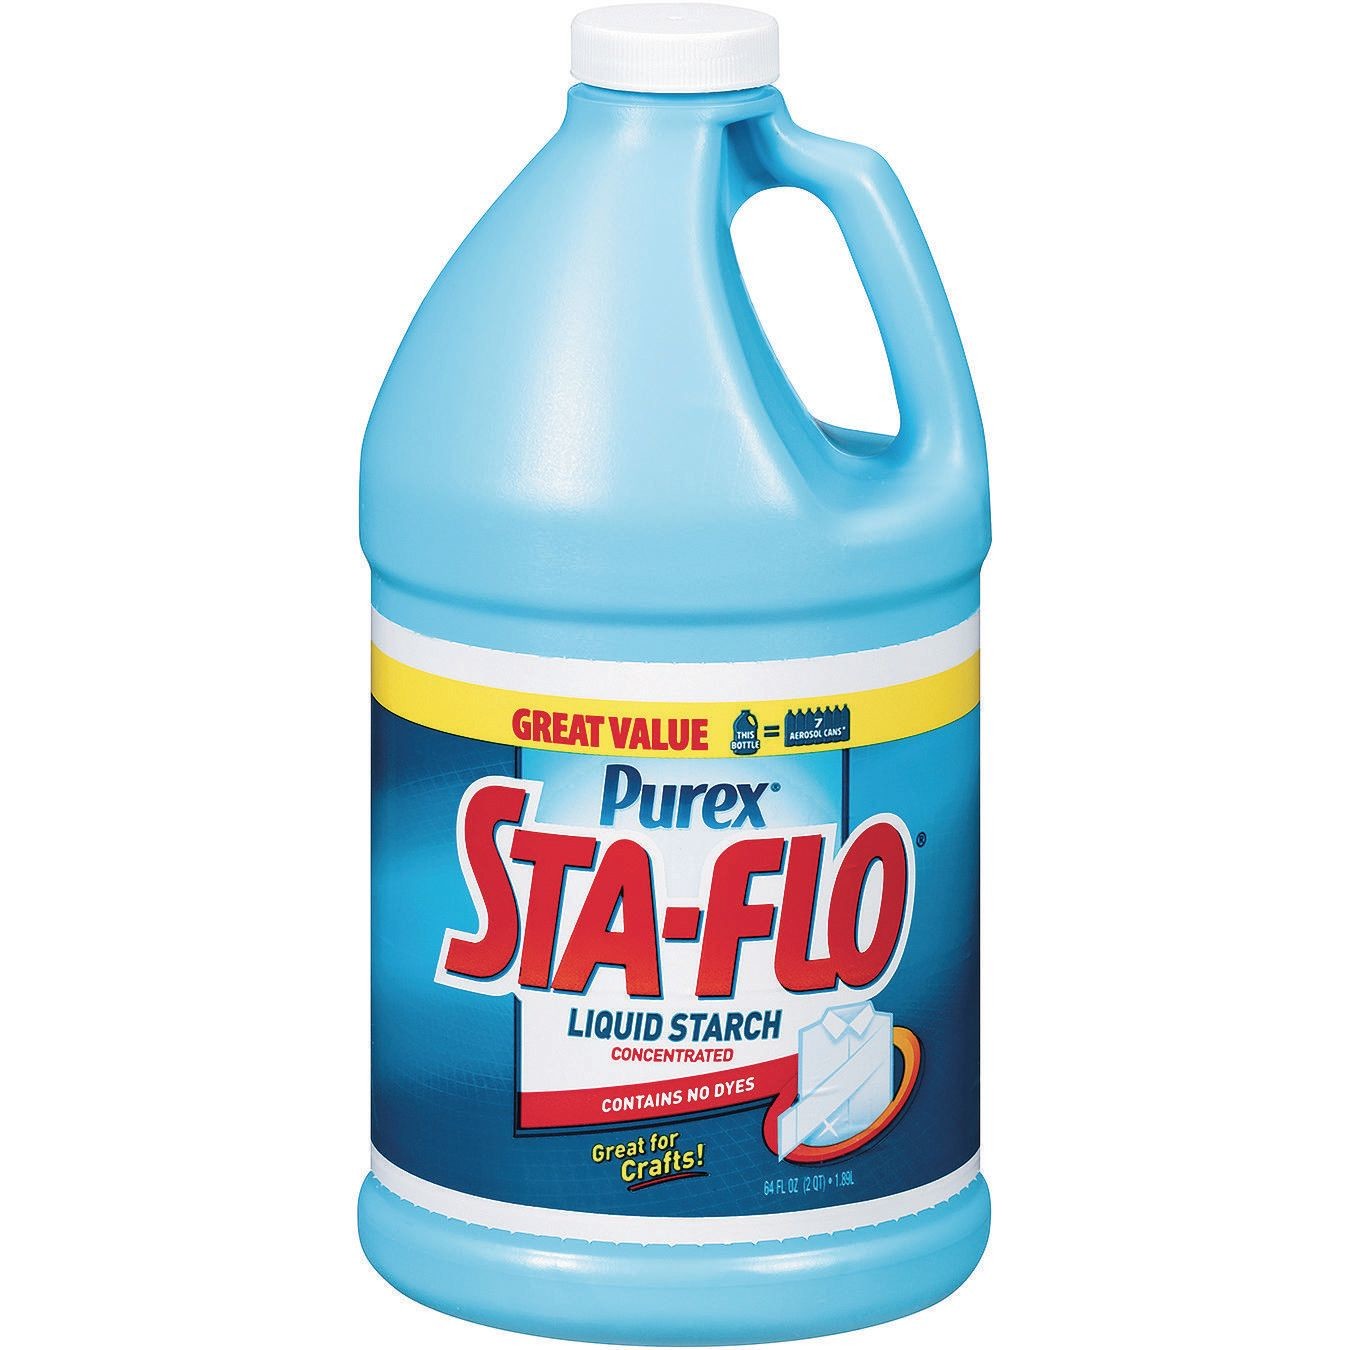 Buy Purex® Sta-Flo Concentrated Liquid Starch, 64 oz. at S&S Worldwide